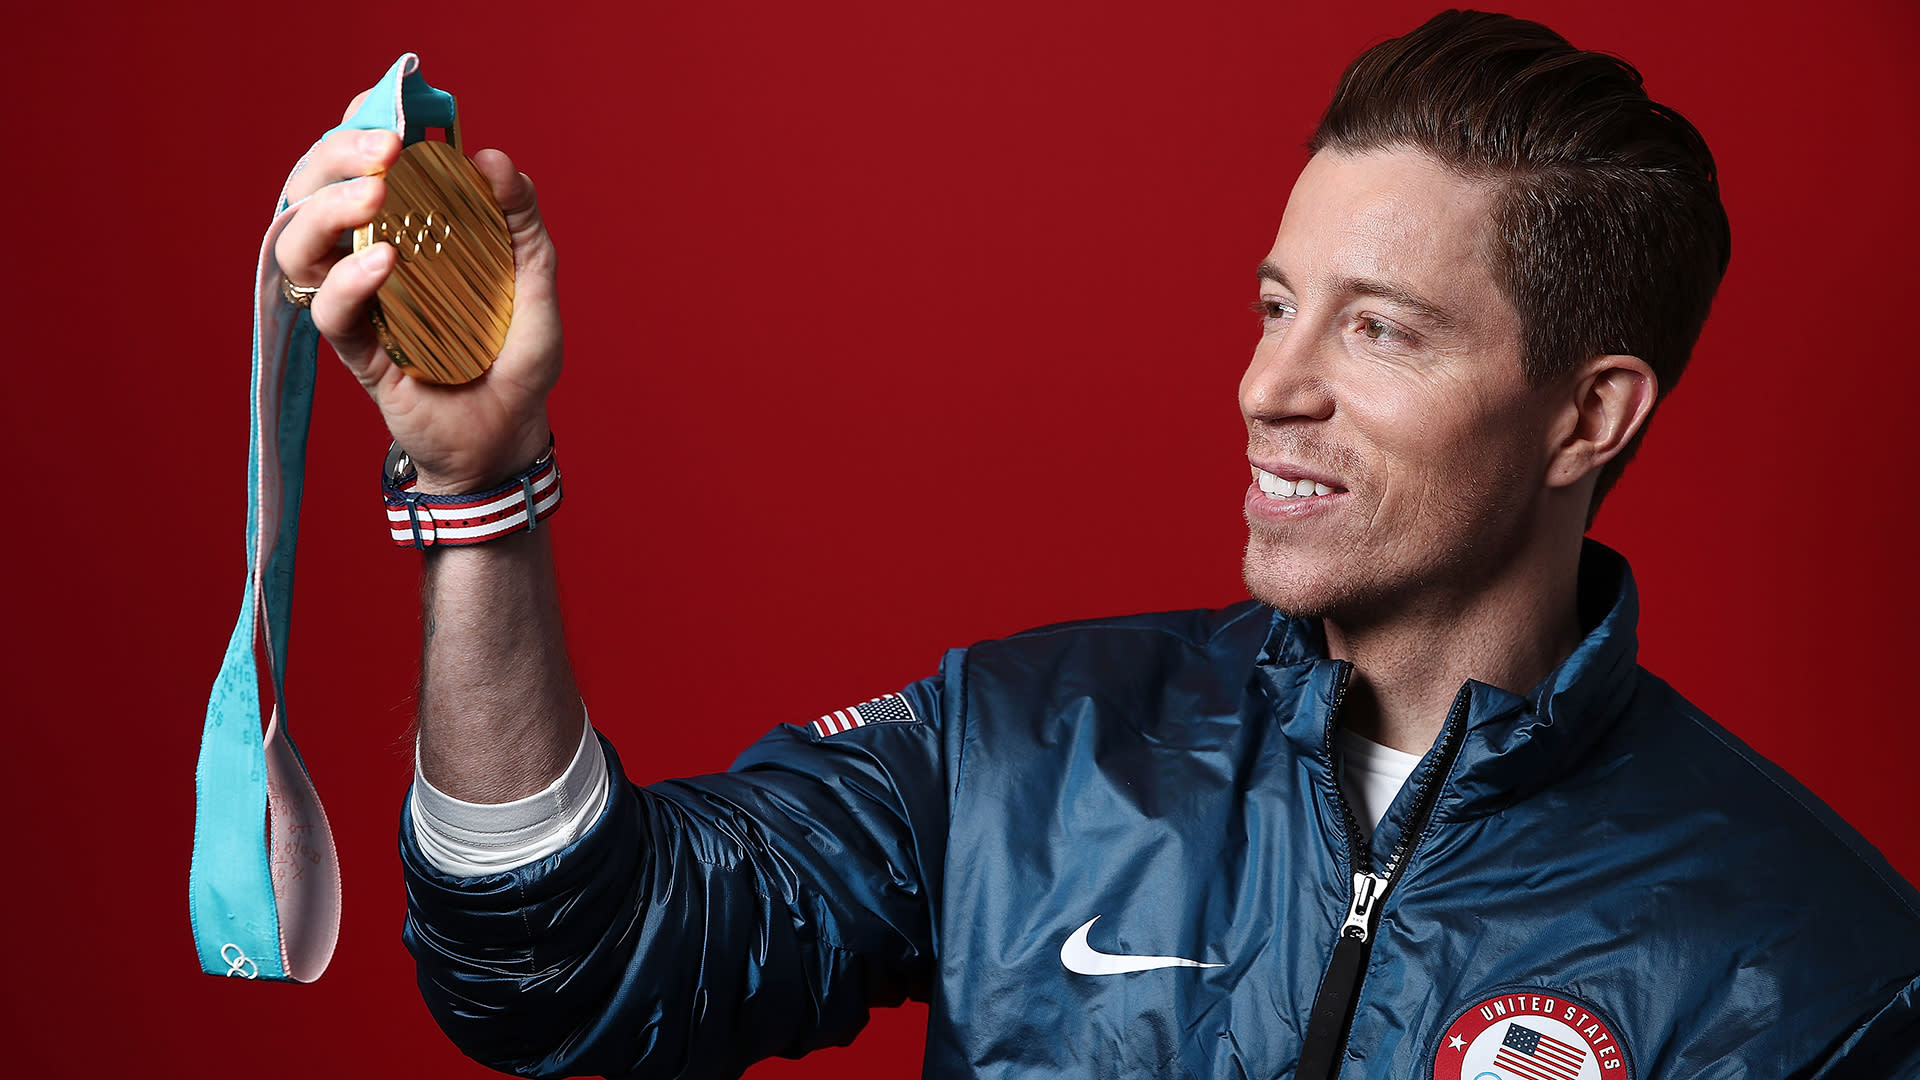 Eight years after hospitalization, will Shaun White attempt the